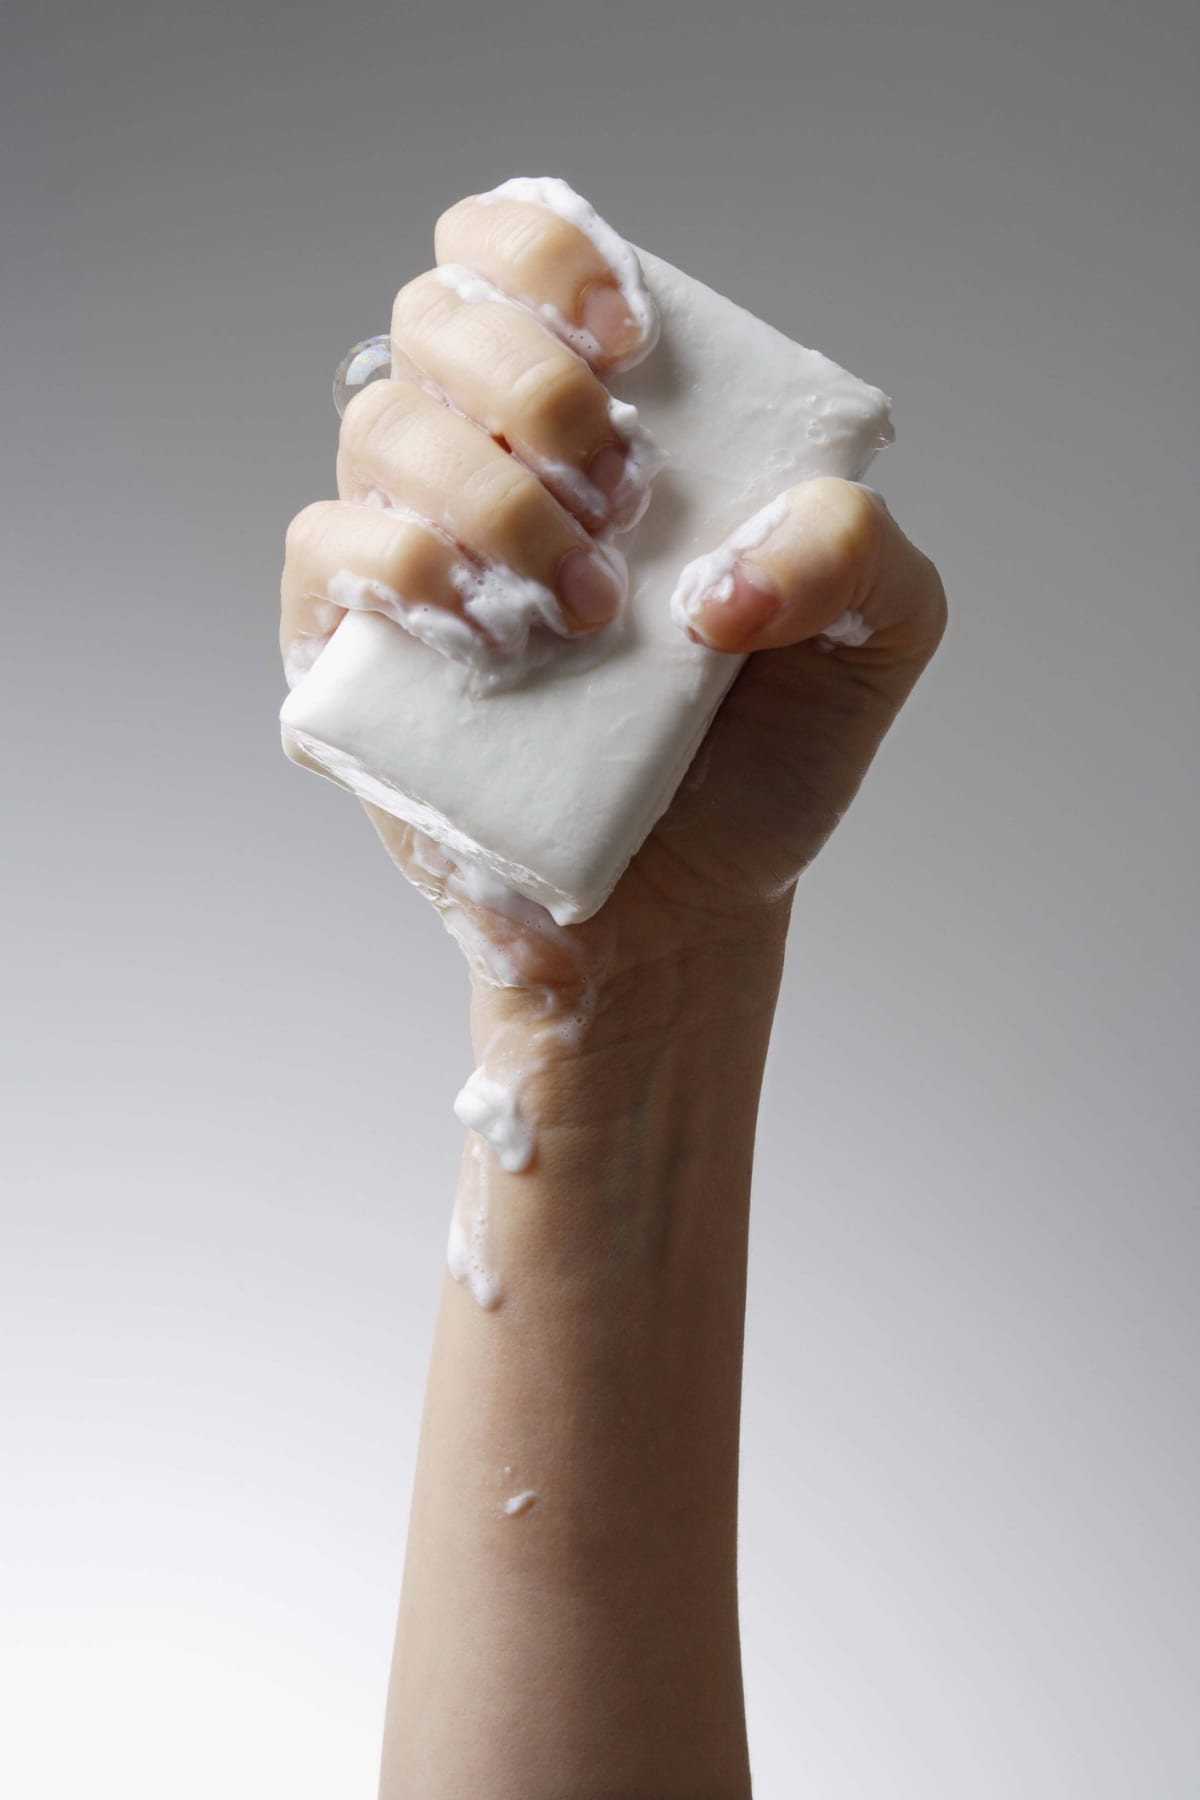 A hand holding up a foaming white soap bar.